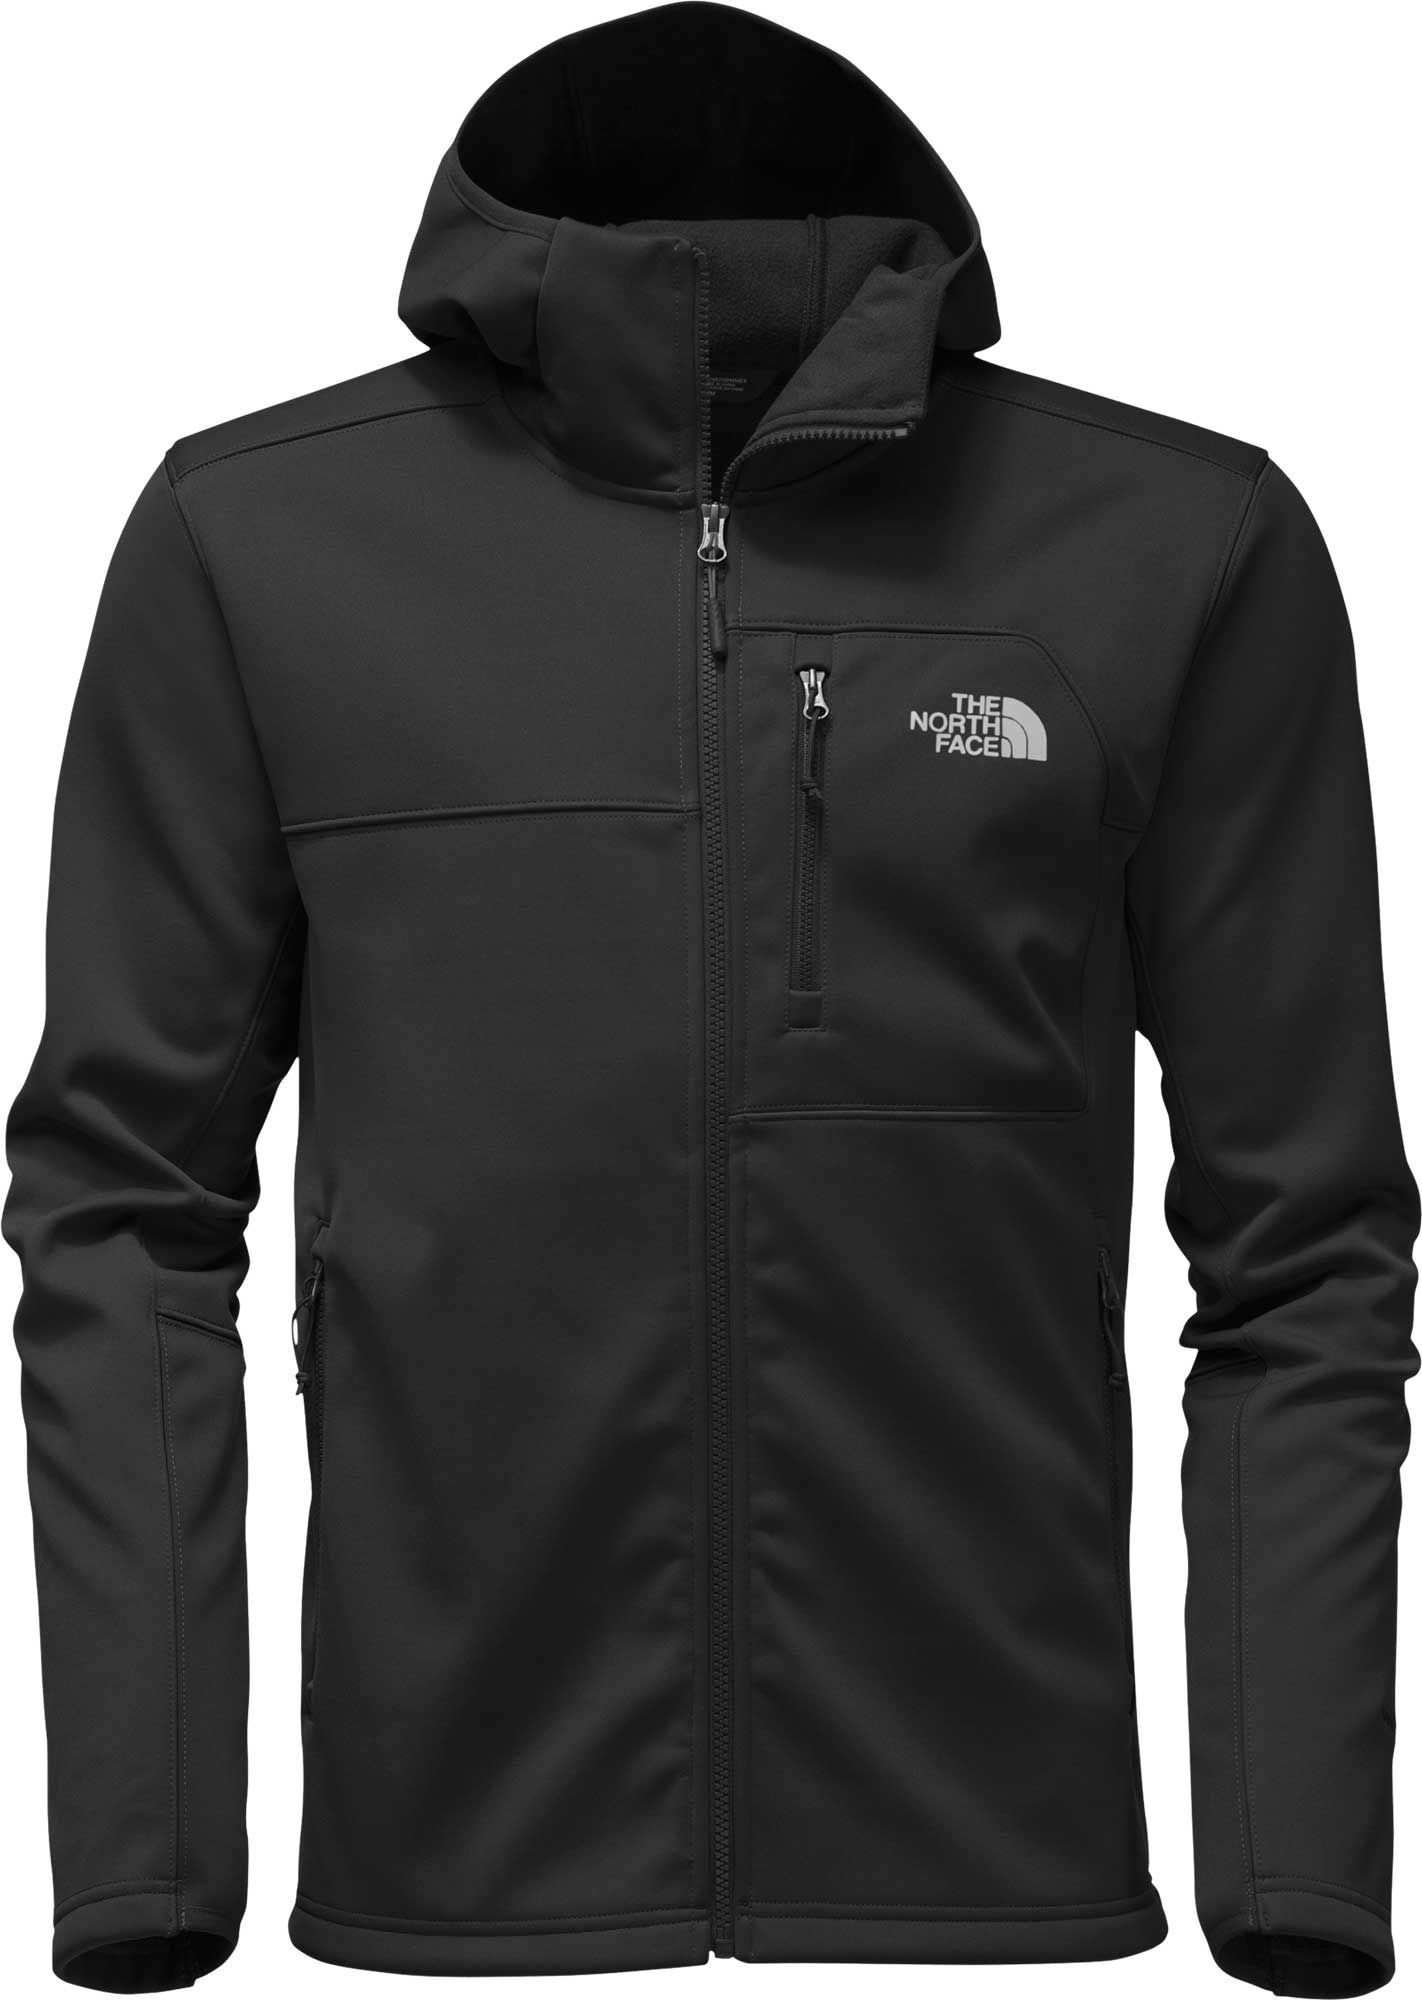 The North Face Men's Apex Risor Hooded Soft Shell Jacket - 8.97